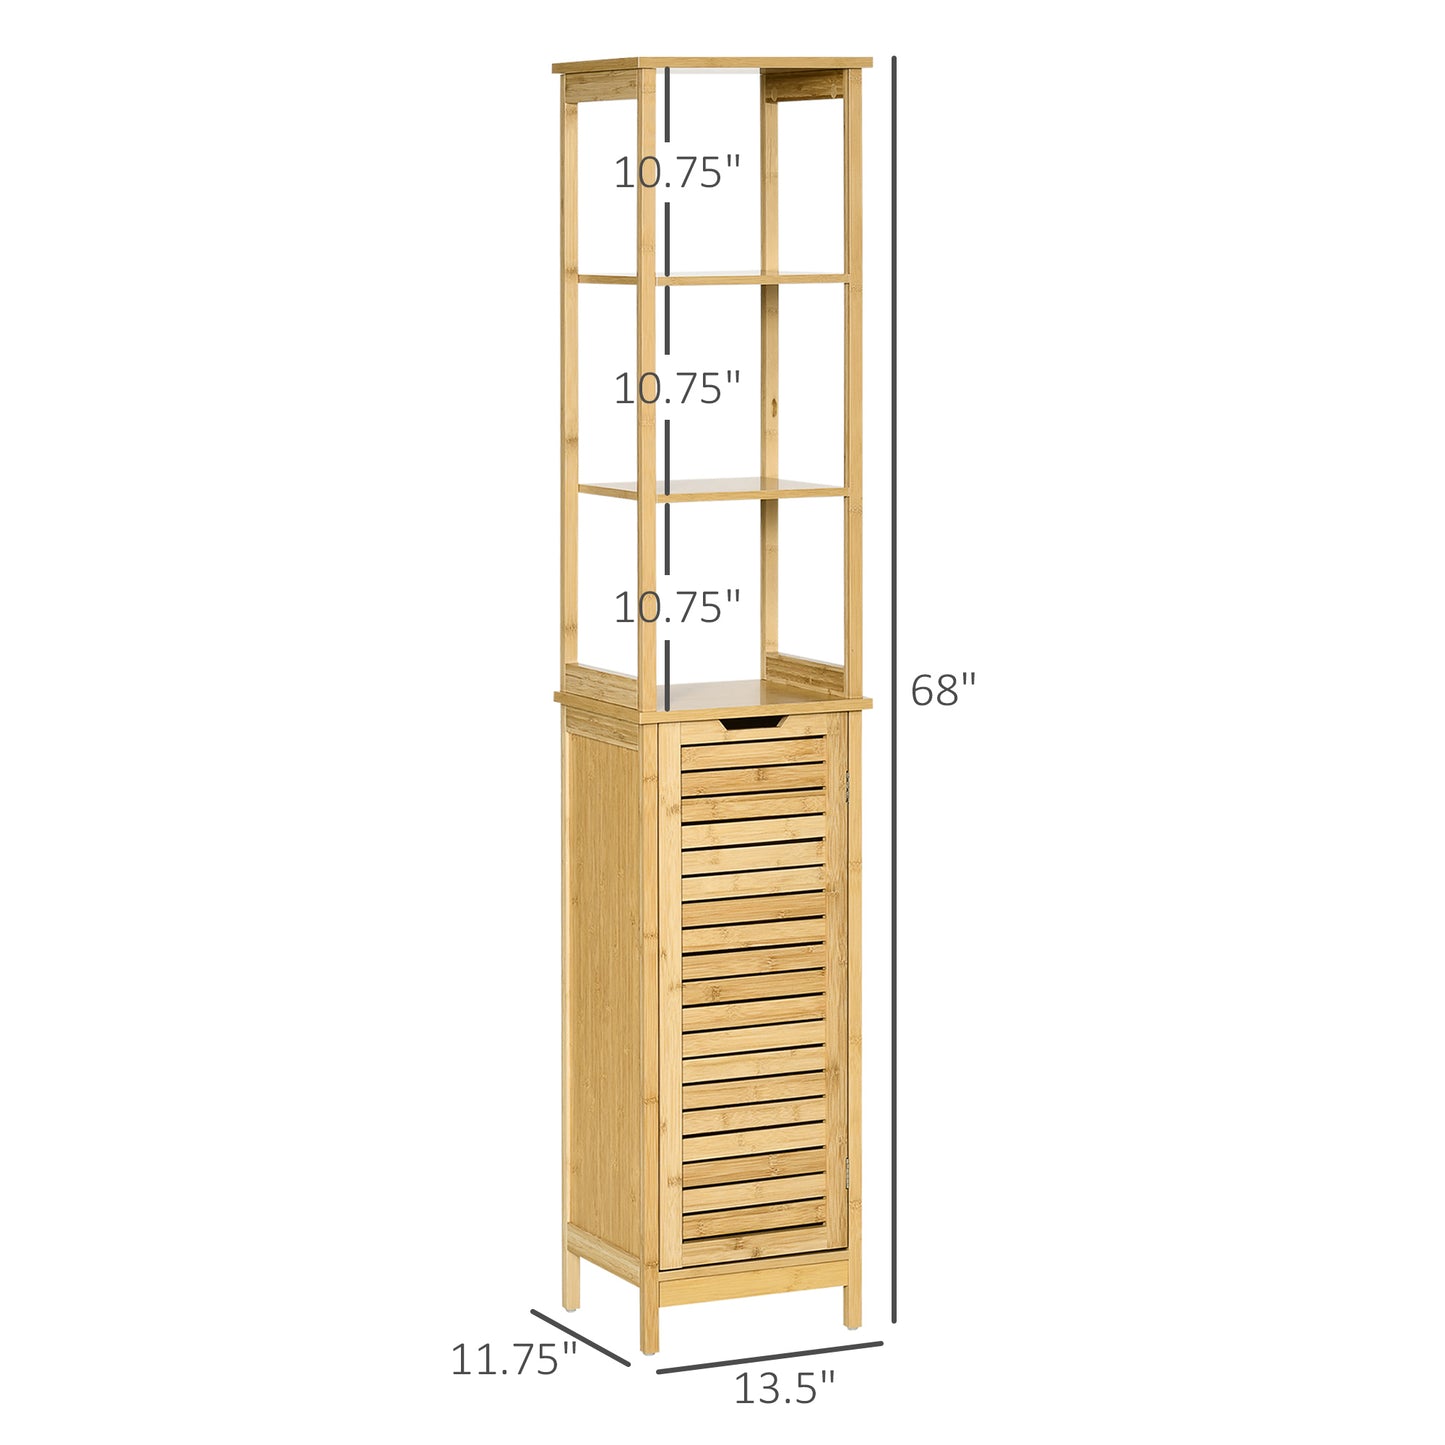 kleankin Bathroom Floor Cabinet with 3 Shelves and Cupboard, Slim and Freestanding Organiser, Tallboy with Storage, Natural